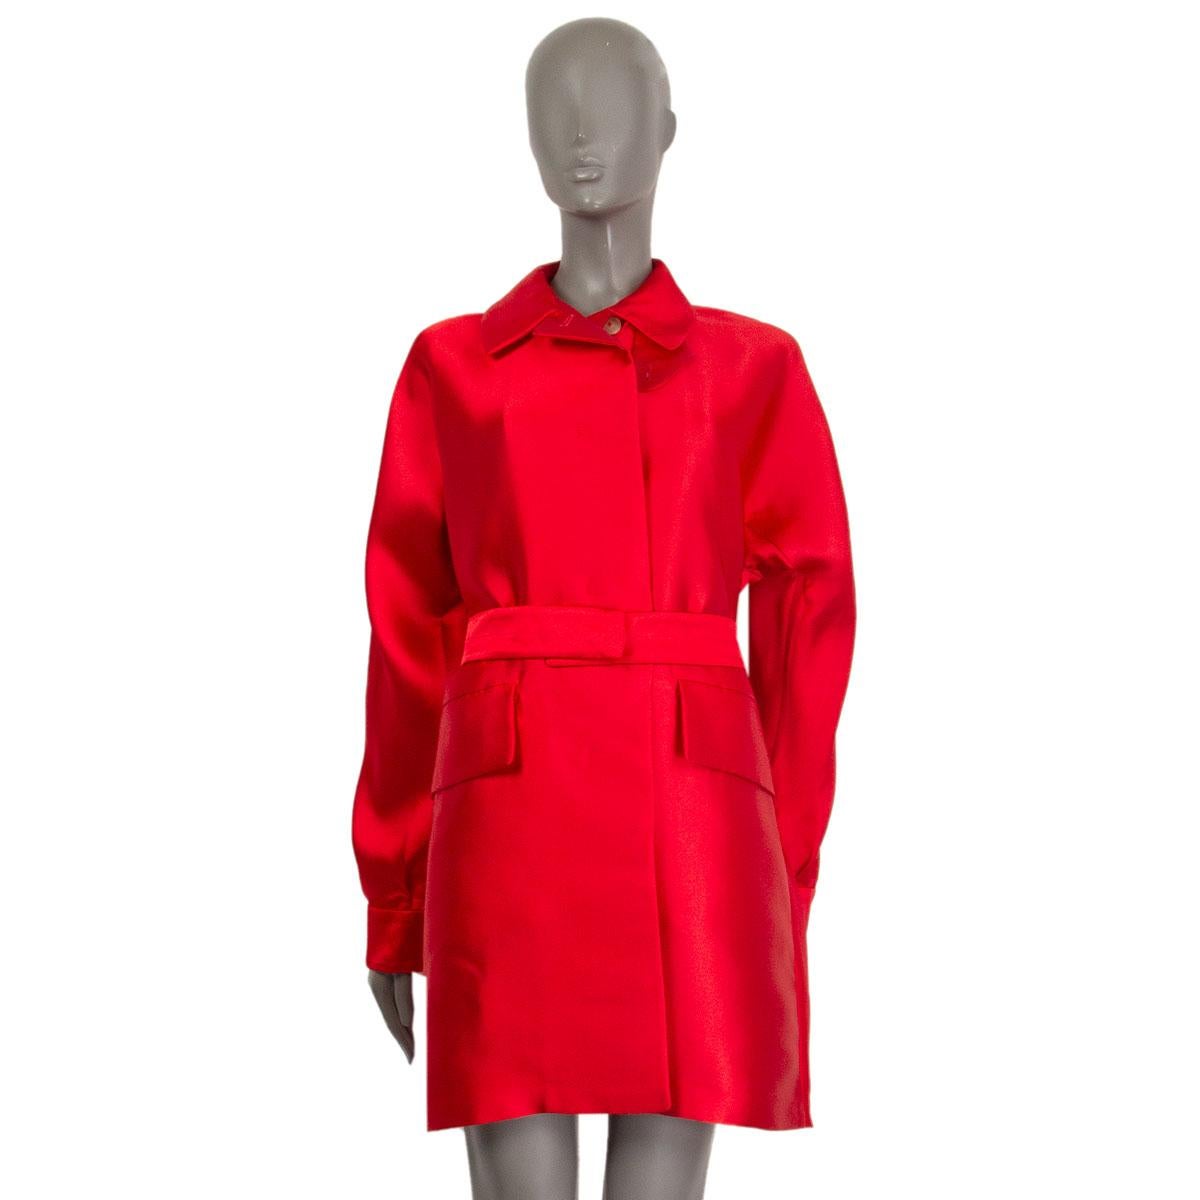 100% authentic Jil Sander belted satin trench coat in red polyester (79%) and silk (21%) with buttoned sleeve cuffs and flap pockets. Closes with three concealed buttons on the front,two at the neck and with a matching belt . Unlined. Has been worn